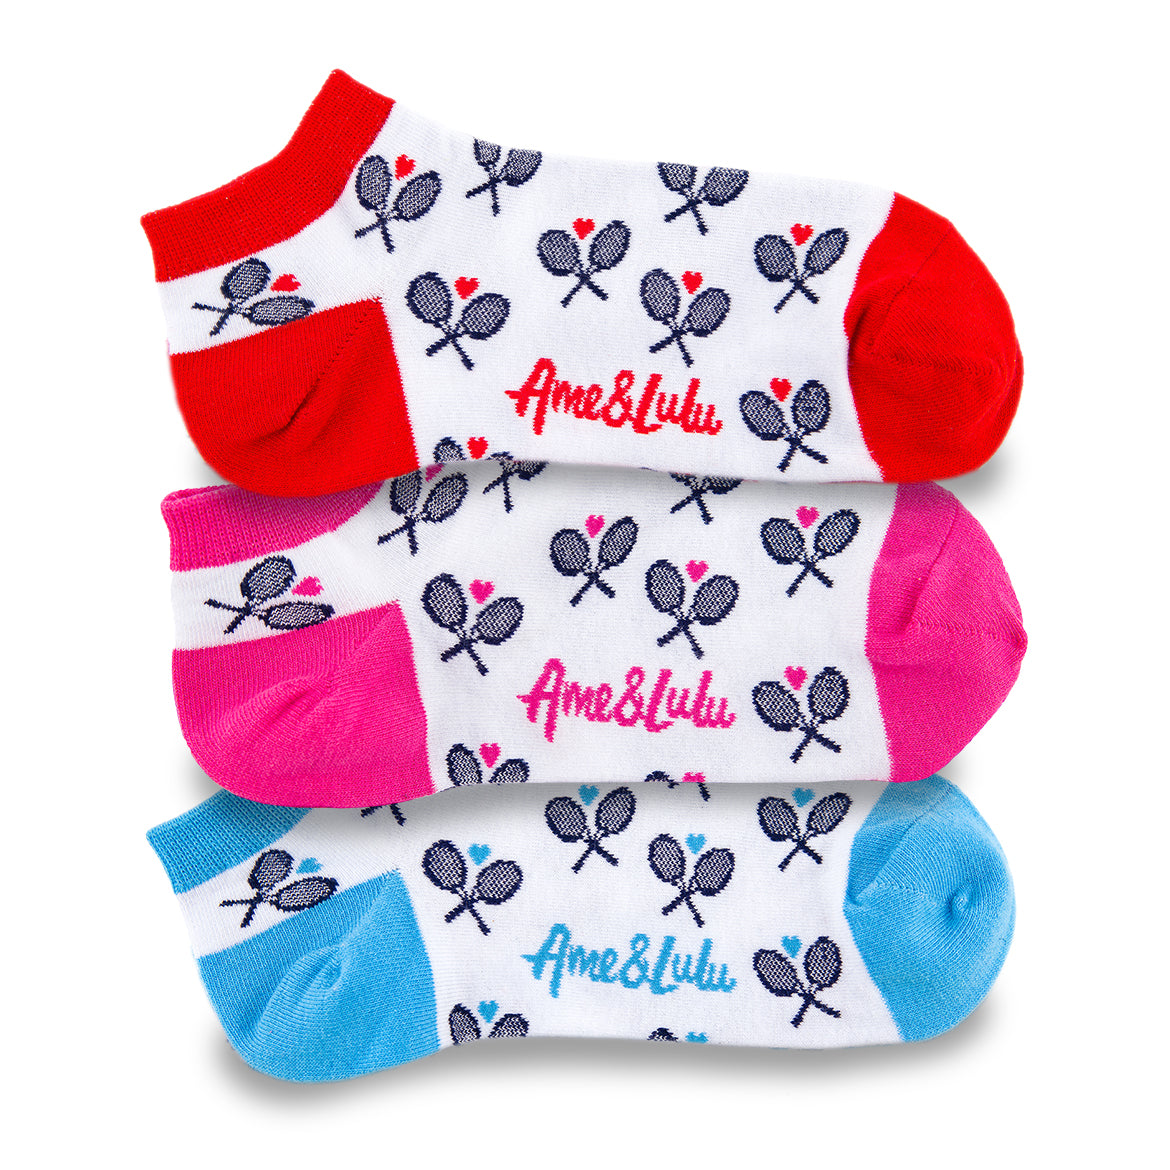 three pack of socks on white background. White sock with red trim and navy racquets, white sock with hot pink trim and navy racquets, and white sock with blue trim and navy racquets.